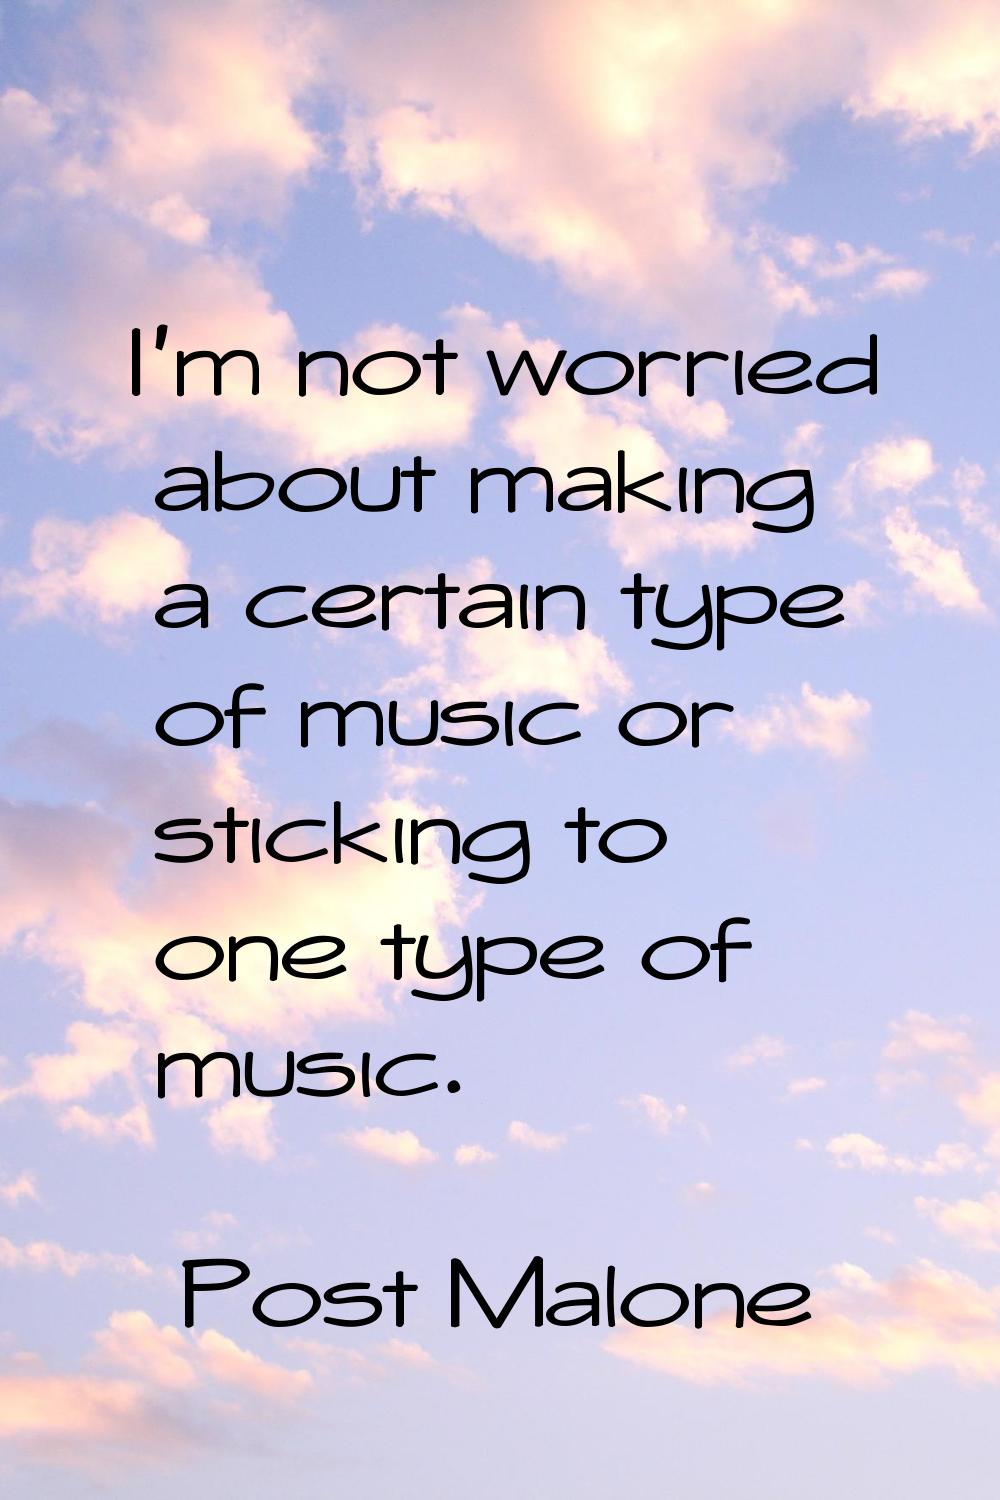 I'm not worried about making a certain type of music or sticking to one type of music.